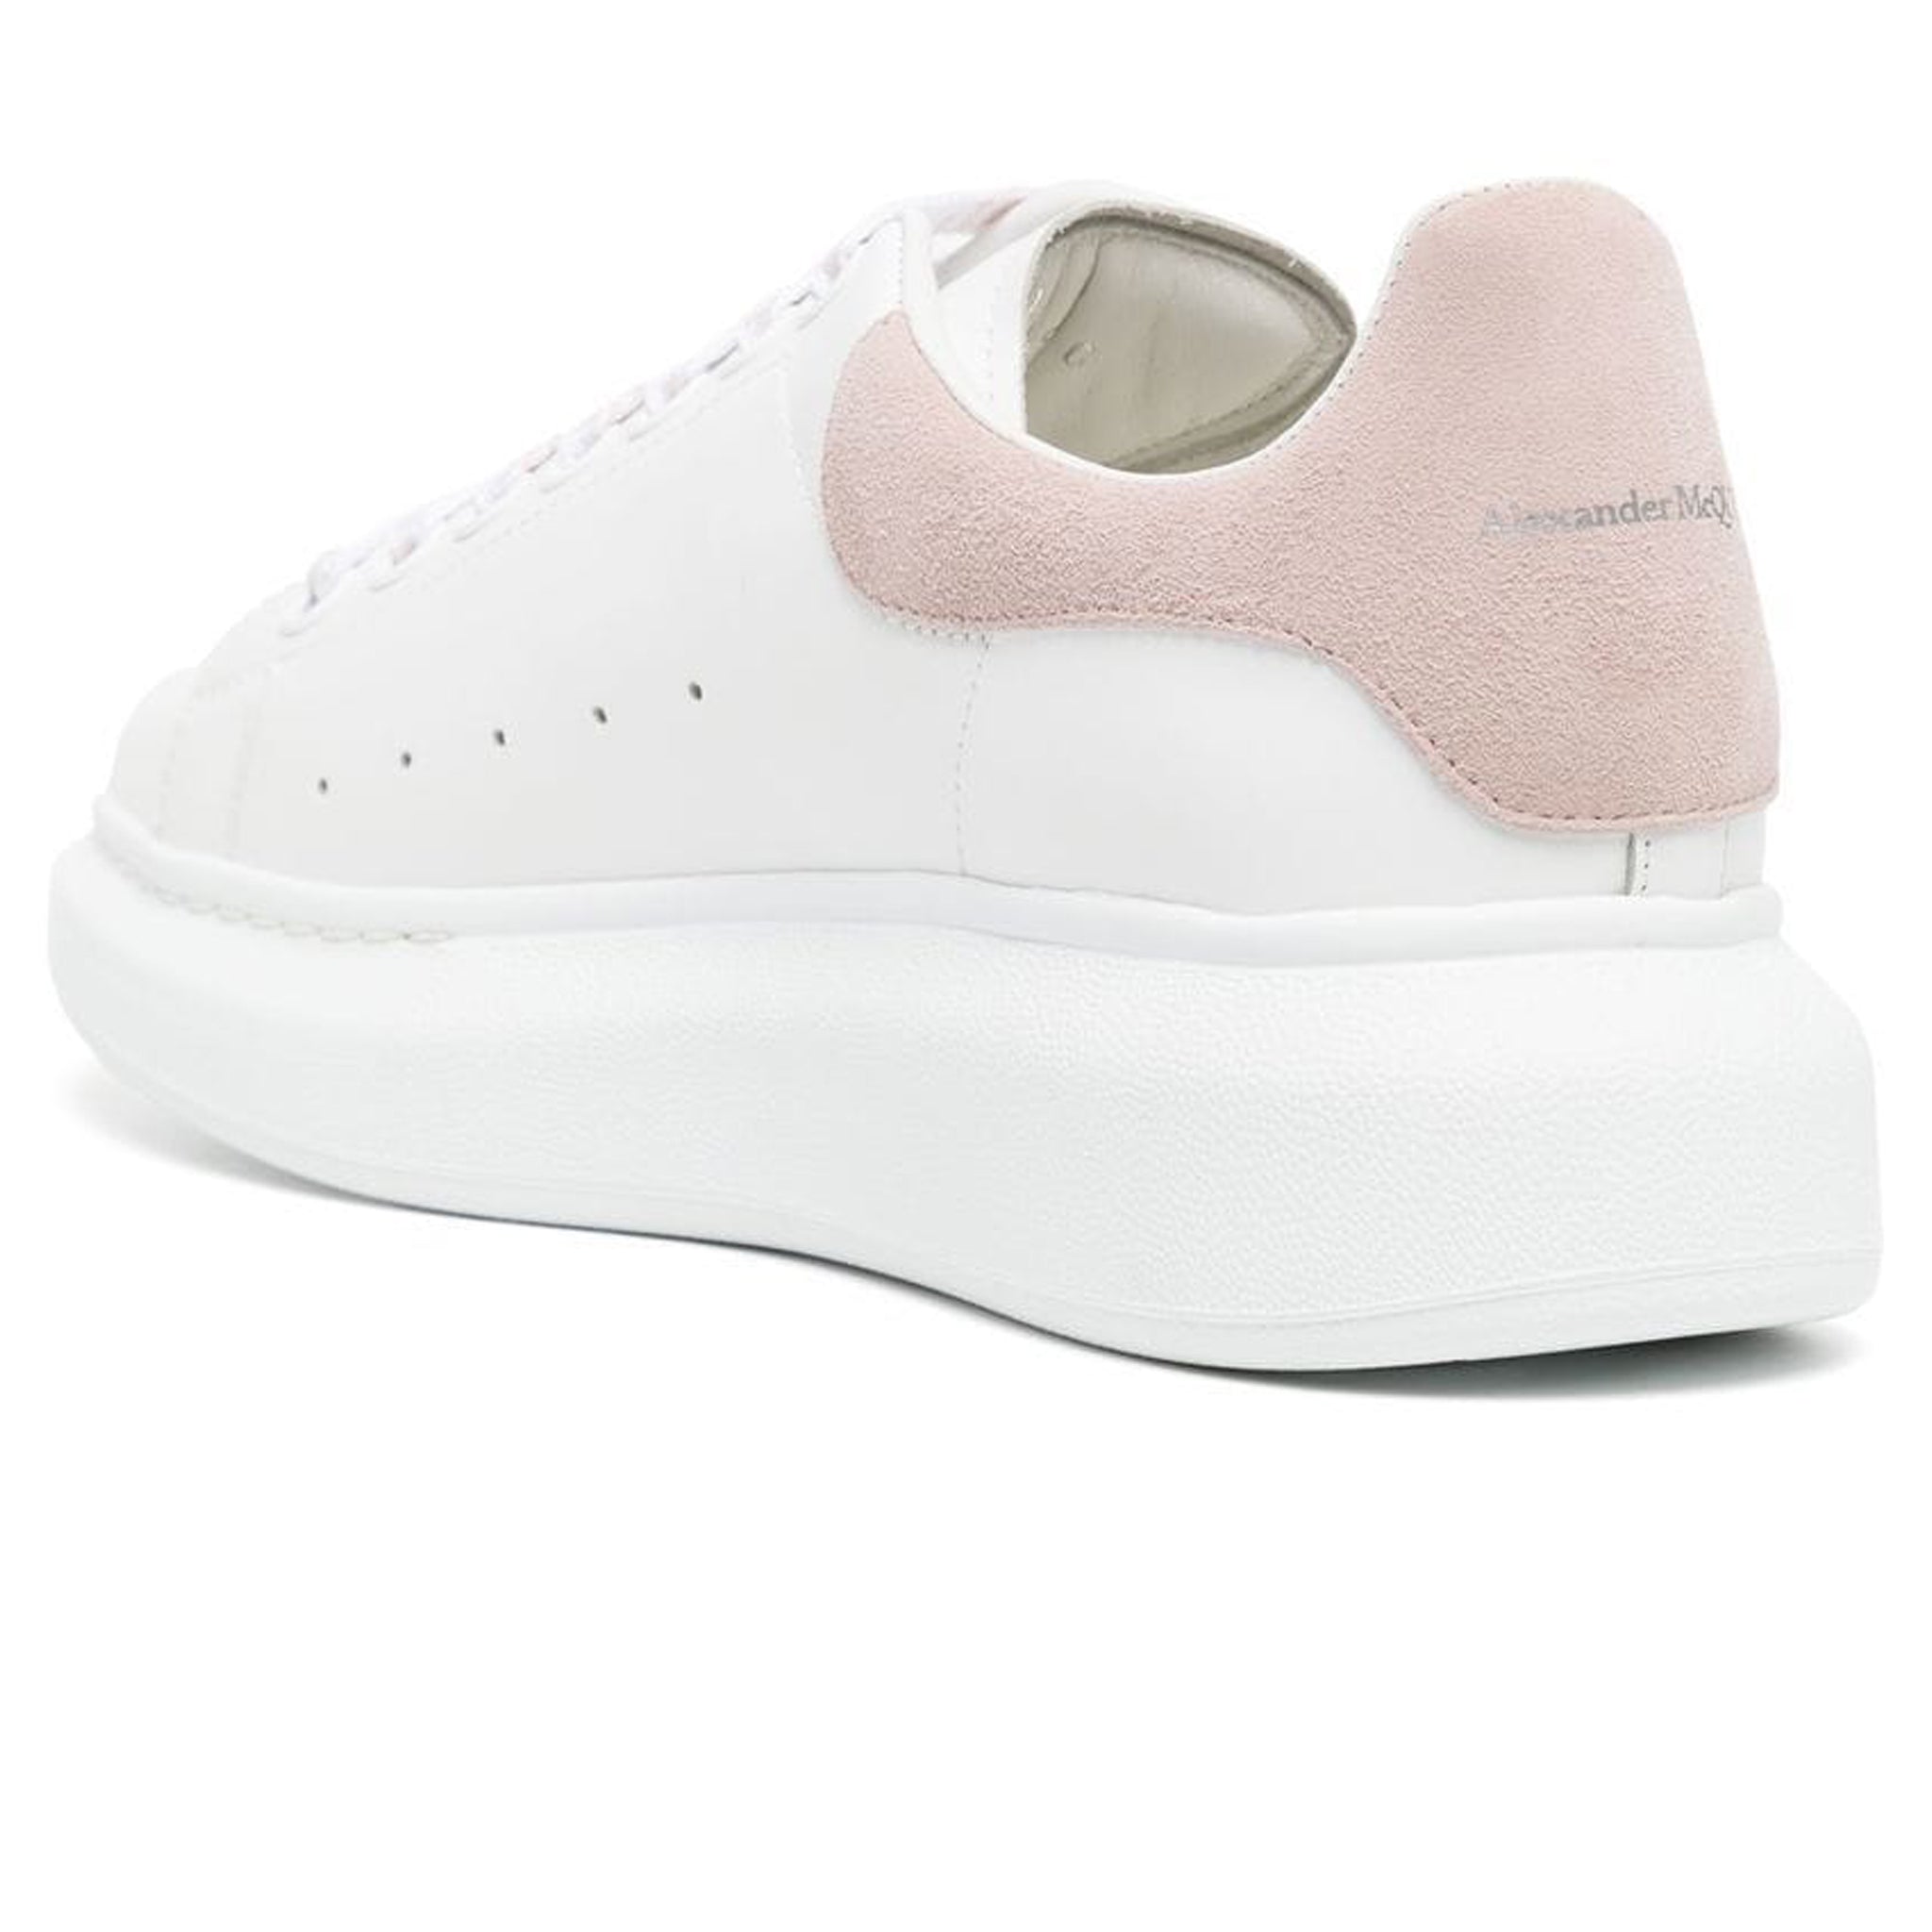 Back view of Alexander Mcqueen Raised Sole White Pink Sneaker